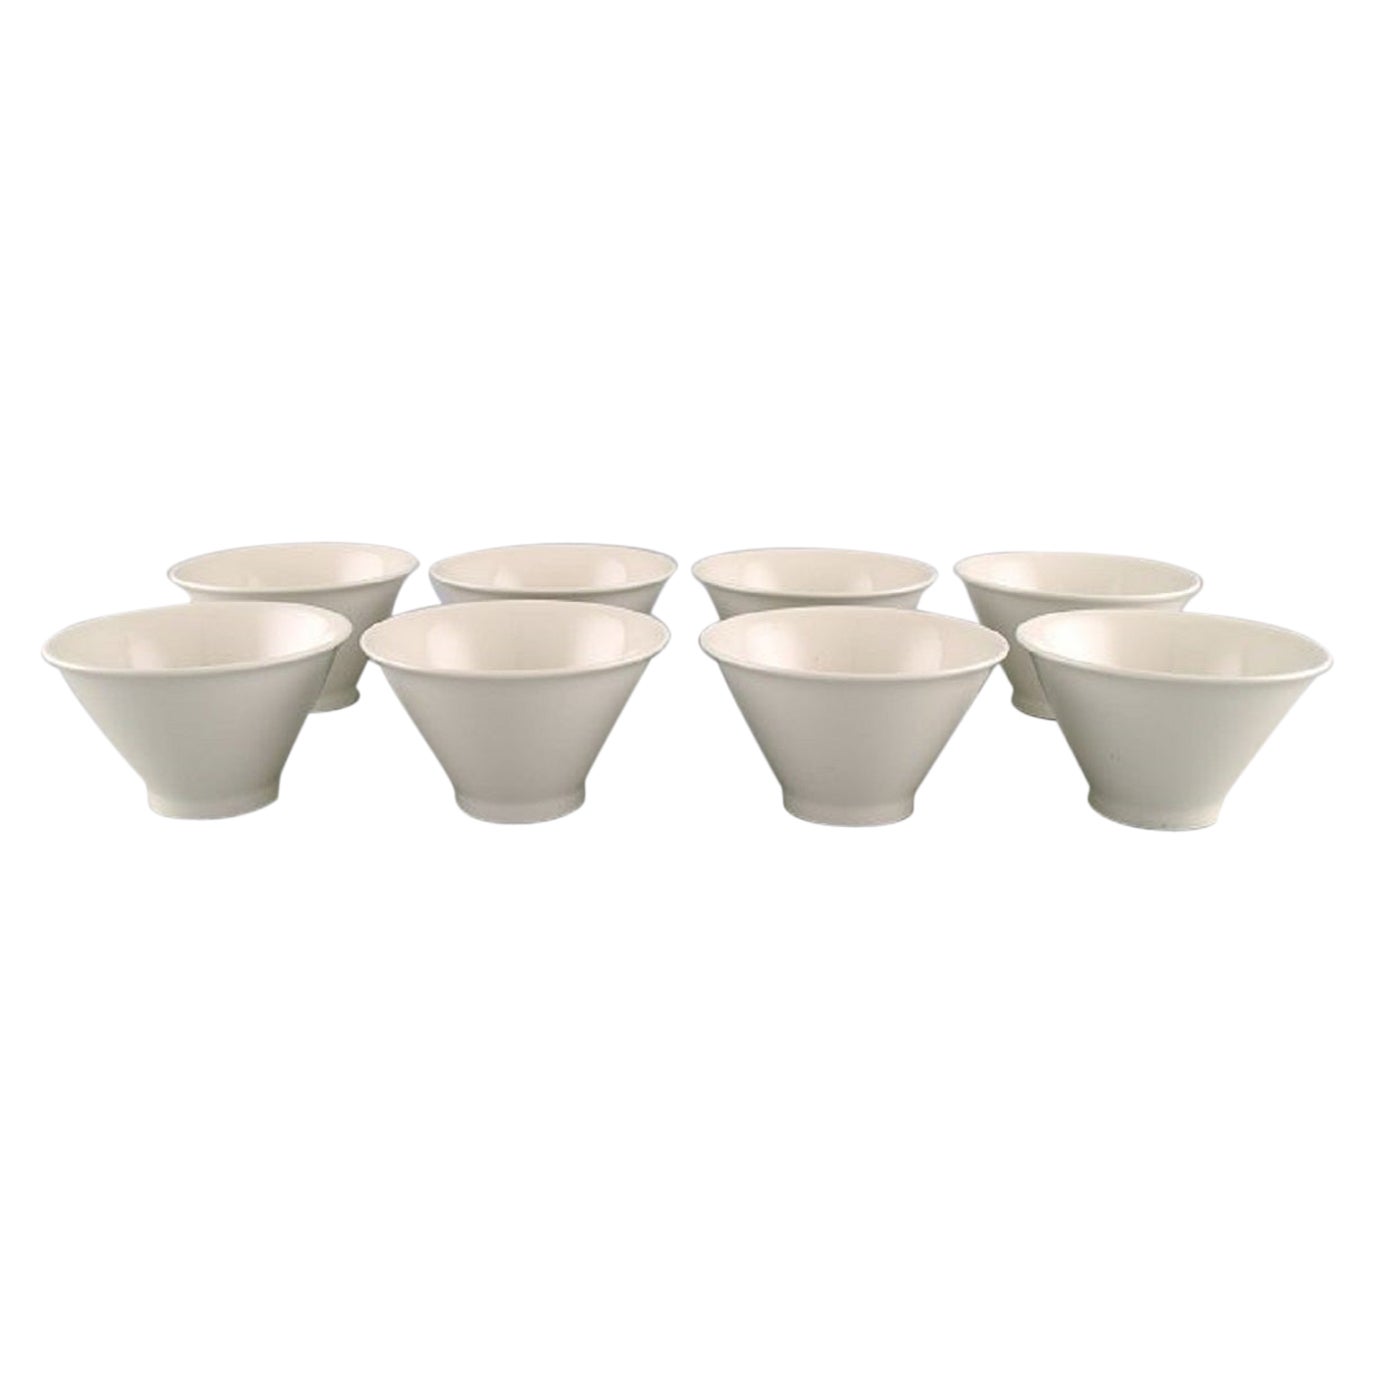 Inkeri Leivo '1944-2010' for Arabia, Eight Harlequin Bowls in Porcelain For Sale